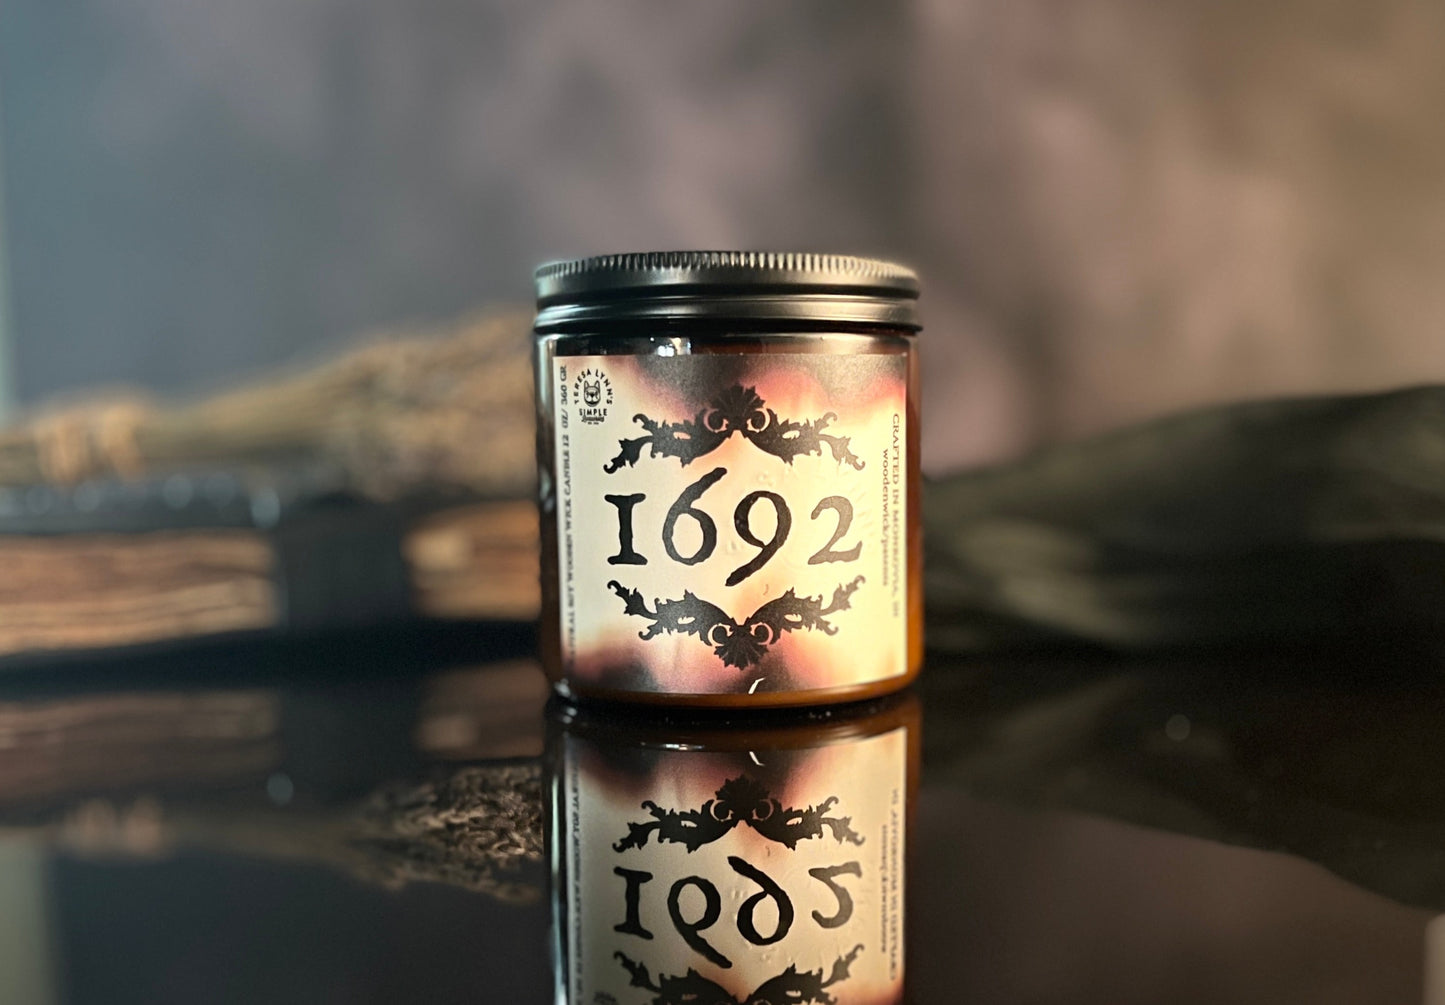 1692, Wooden Wick Soy Wax Candle, sultry, mysterious, witch, oud, frankincense, myrrh, ember, Holiday, Salem, halloween, Salem, remember